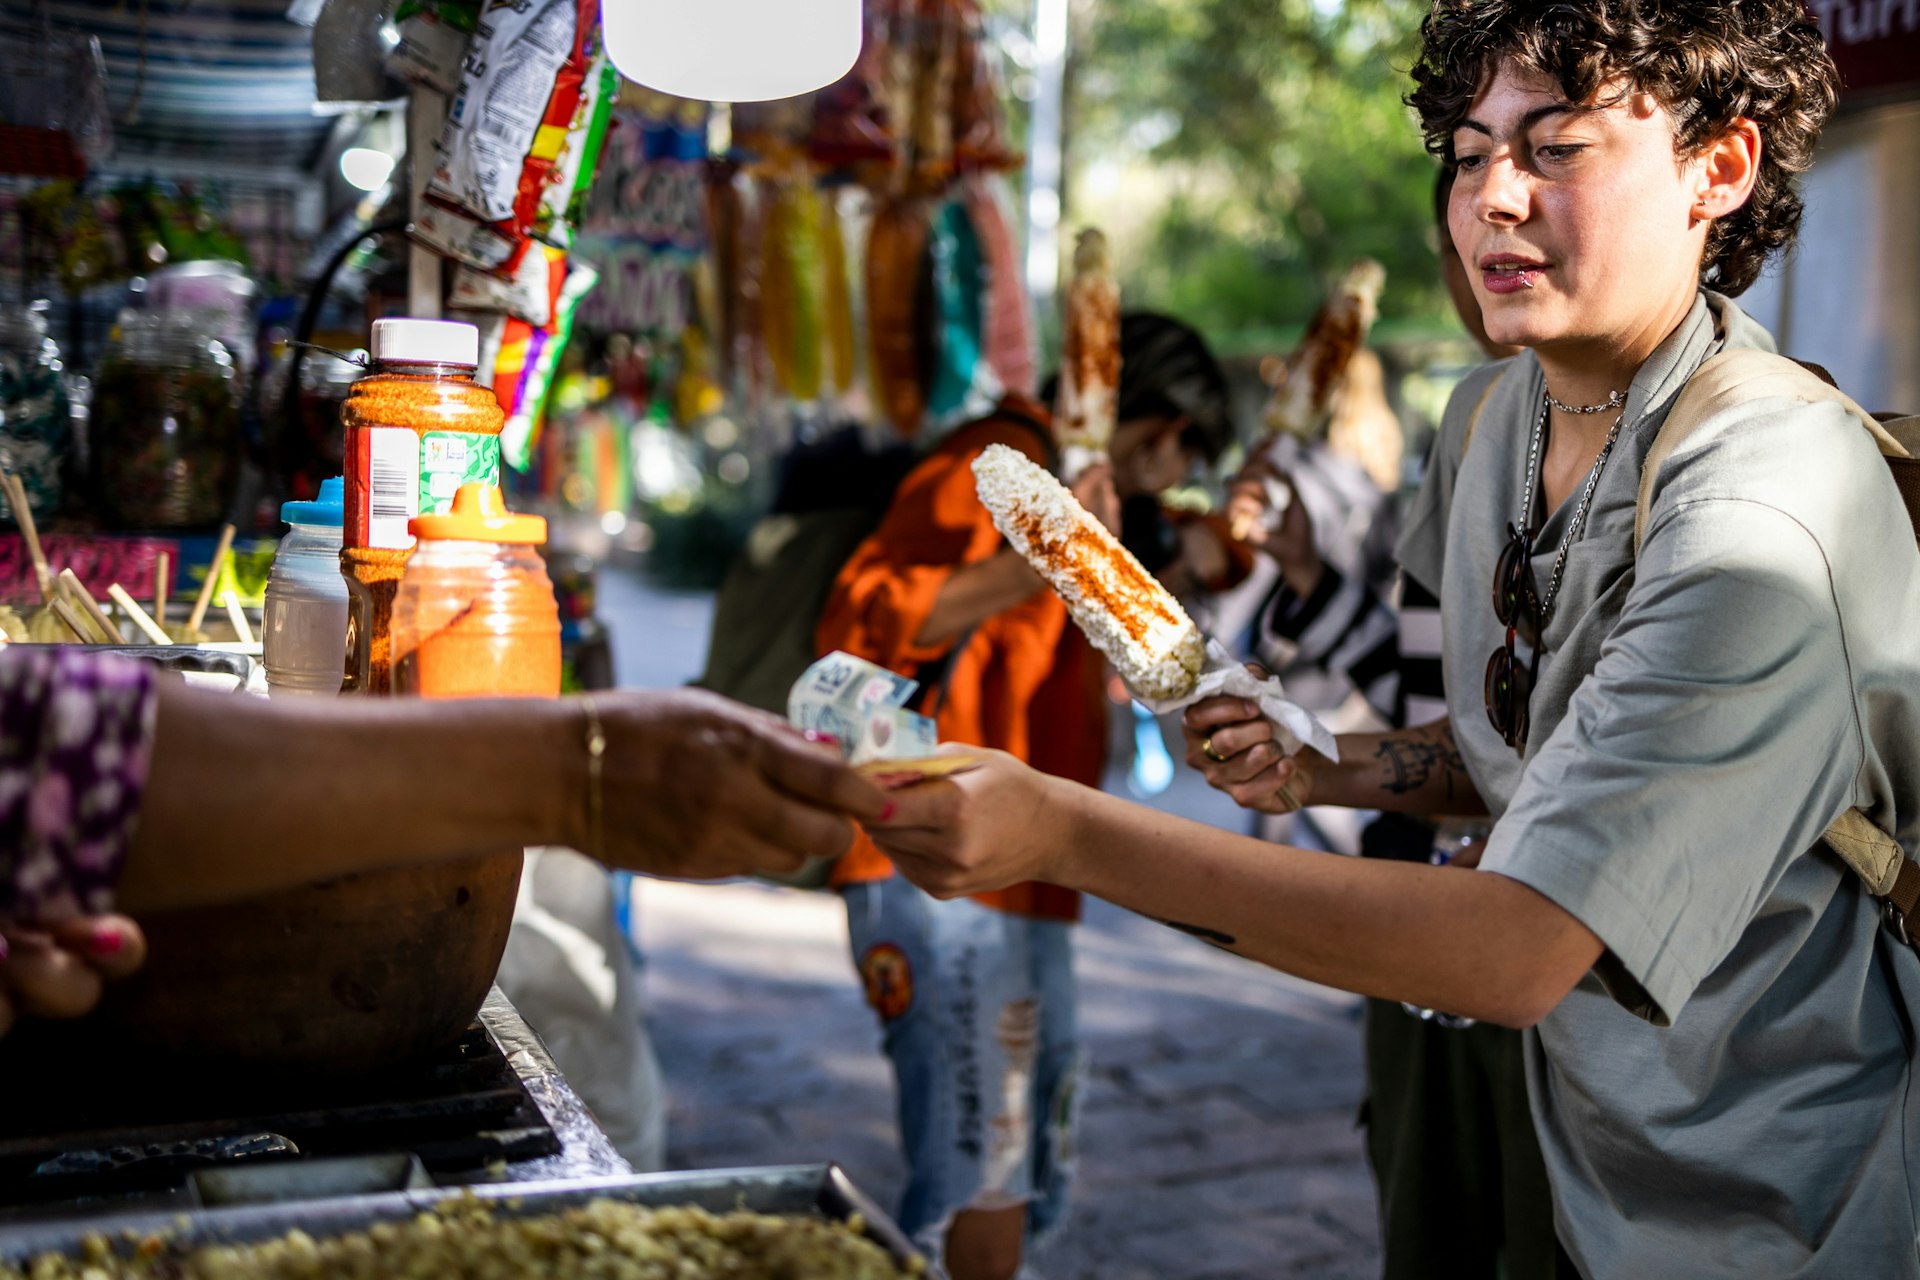 A woman pays for a sweetcorn on a stick at a street food stall in Mexico